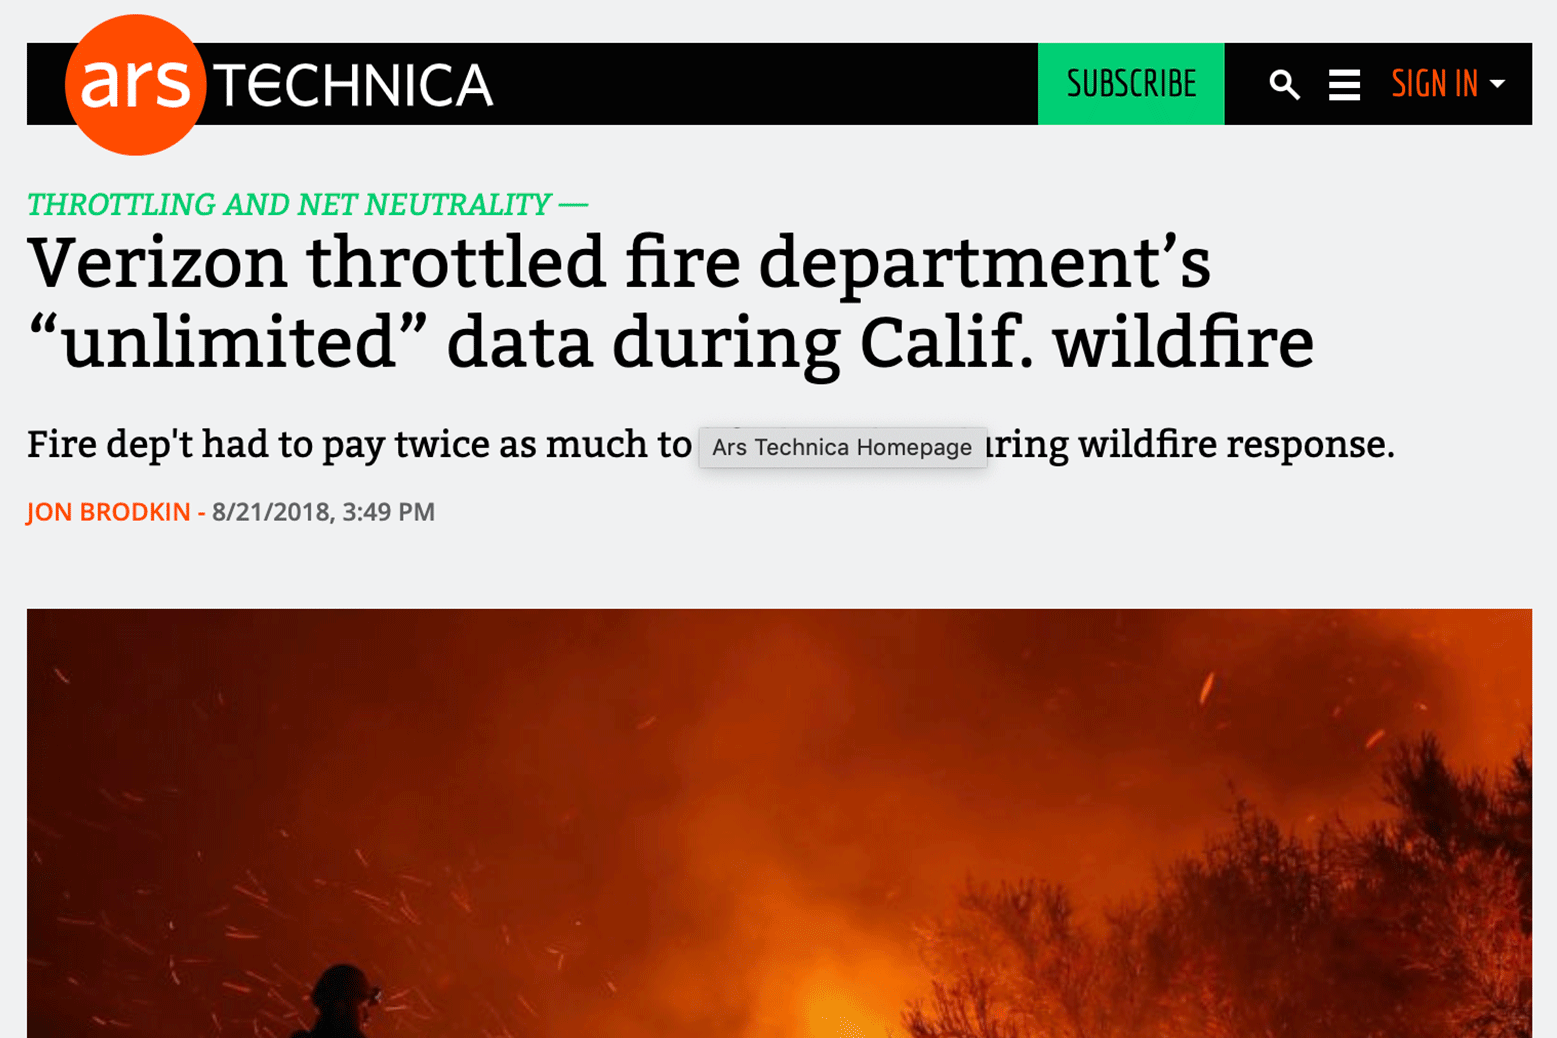 An Ars Technica headline that says, "Verizon throttled fire department's 'unlimited' data during Calif. wildfire."